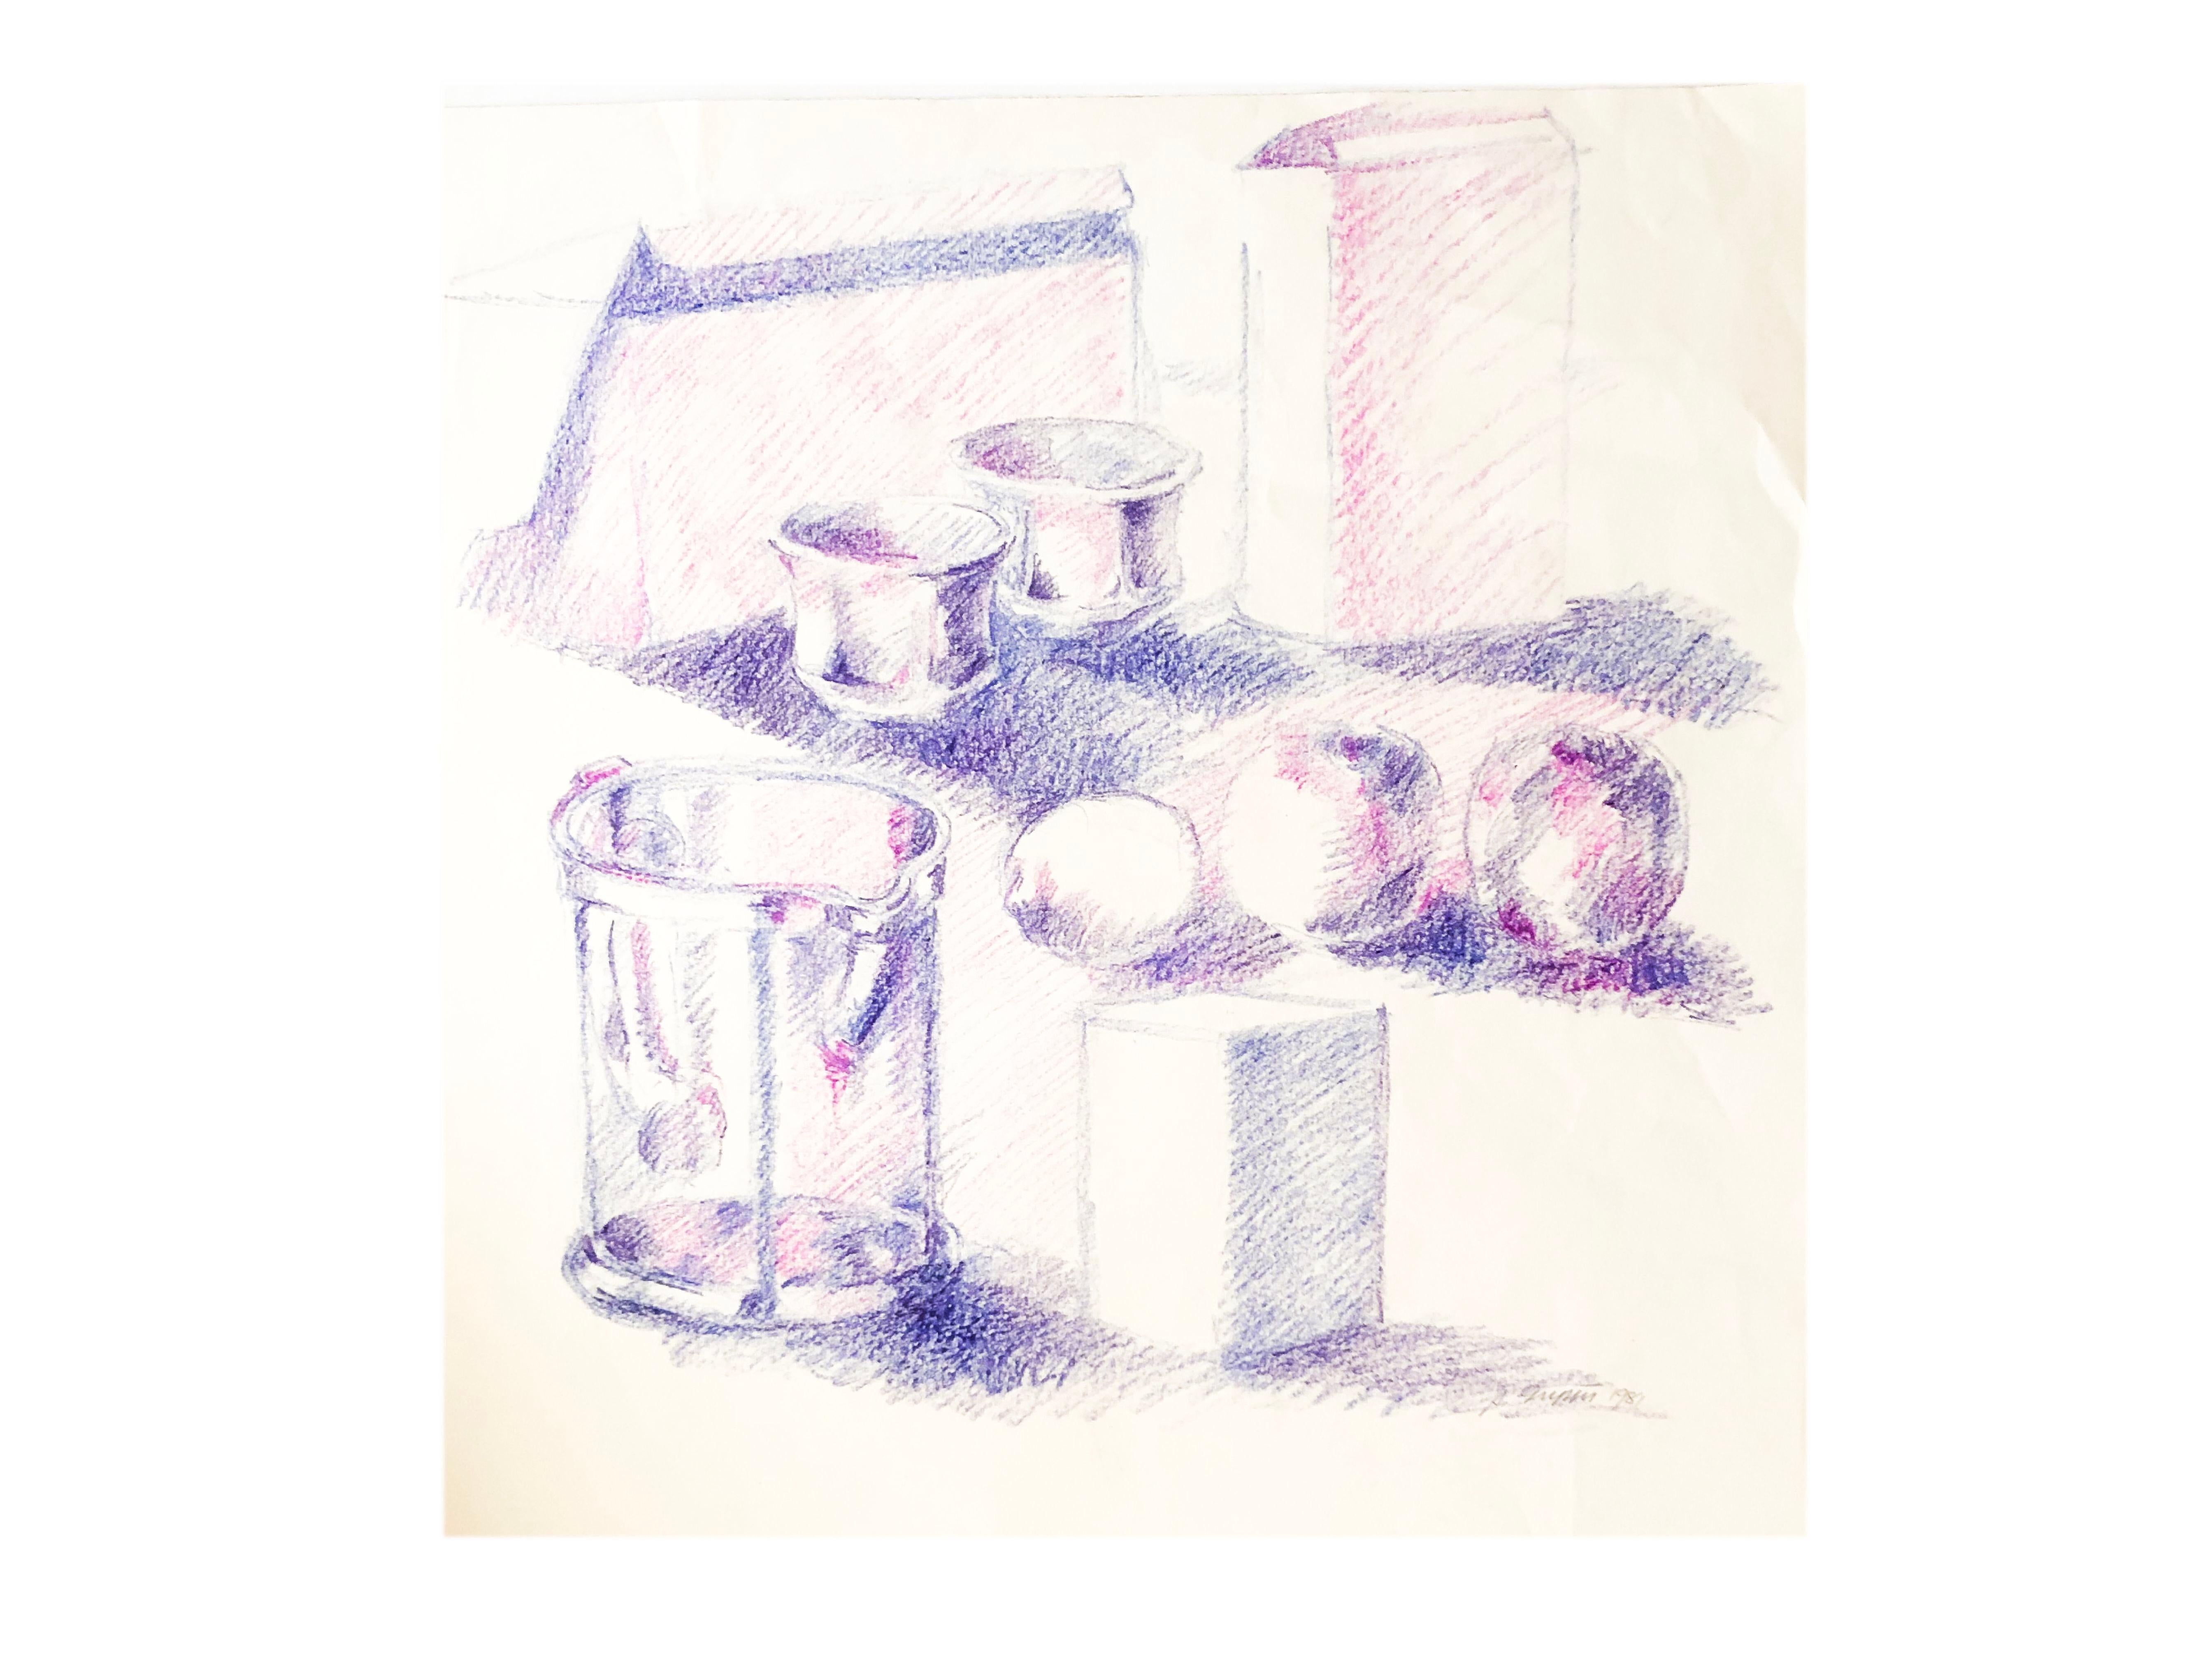 Gorgeous still life drawing by New York Ab Ex artist Salvatore Grippi. Violet oil pencil on paper.